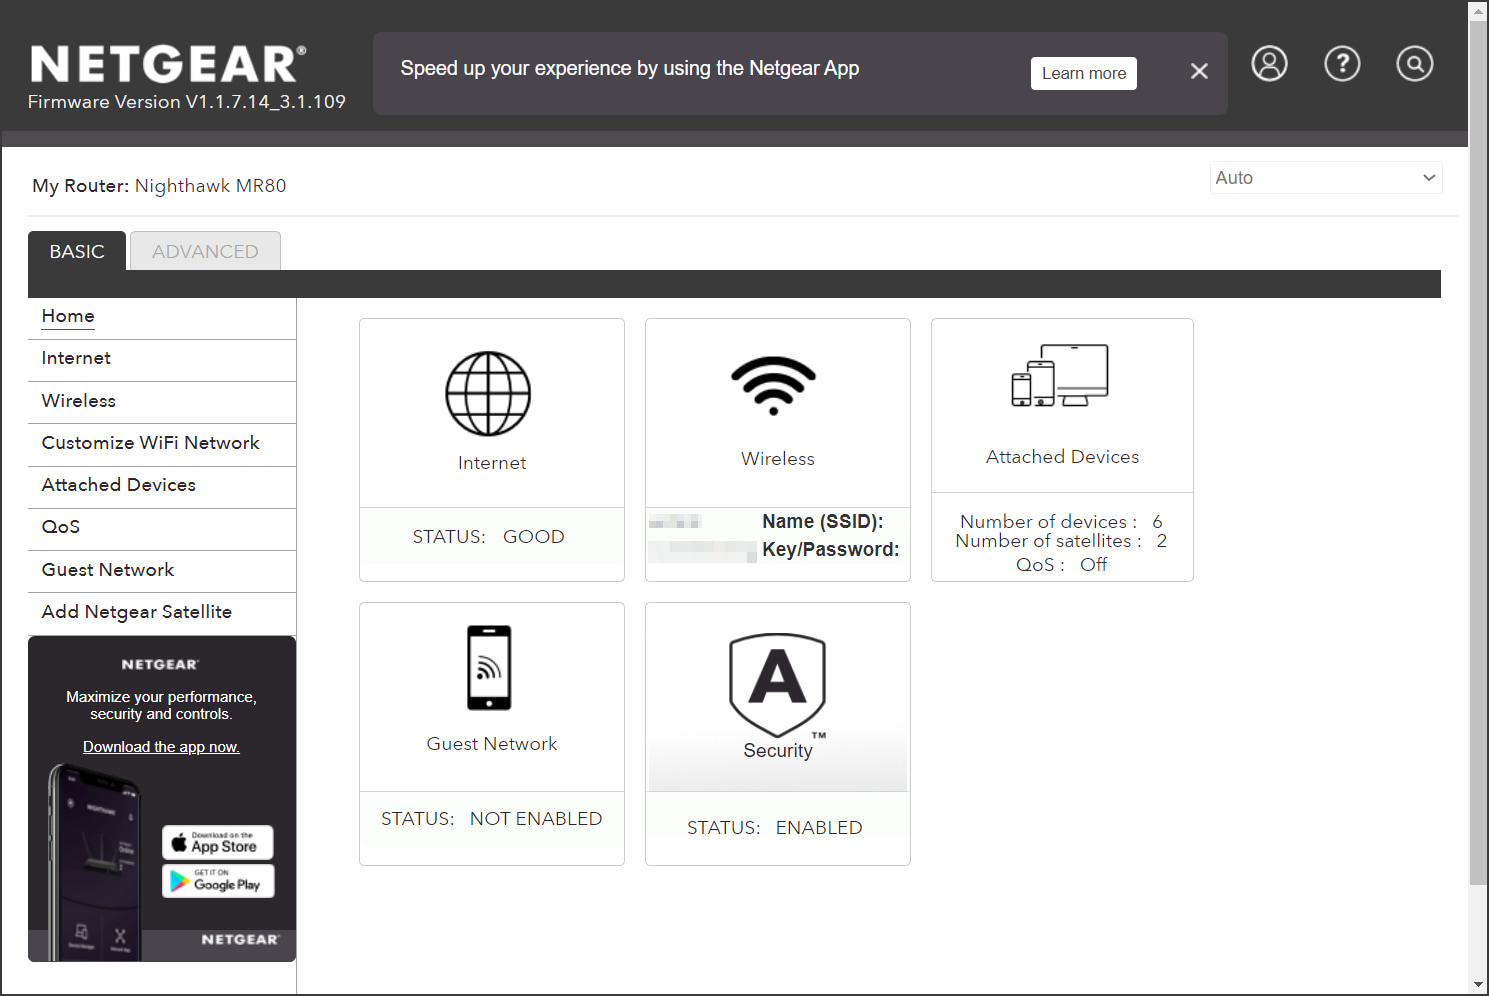 NETGEAR web interface for routers